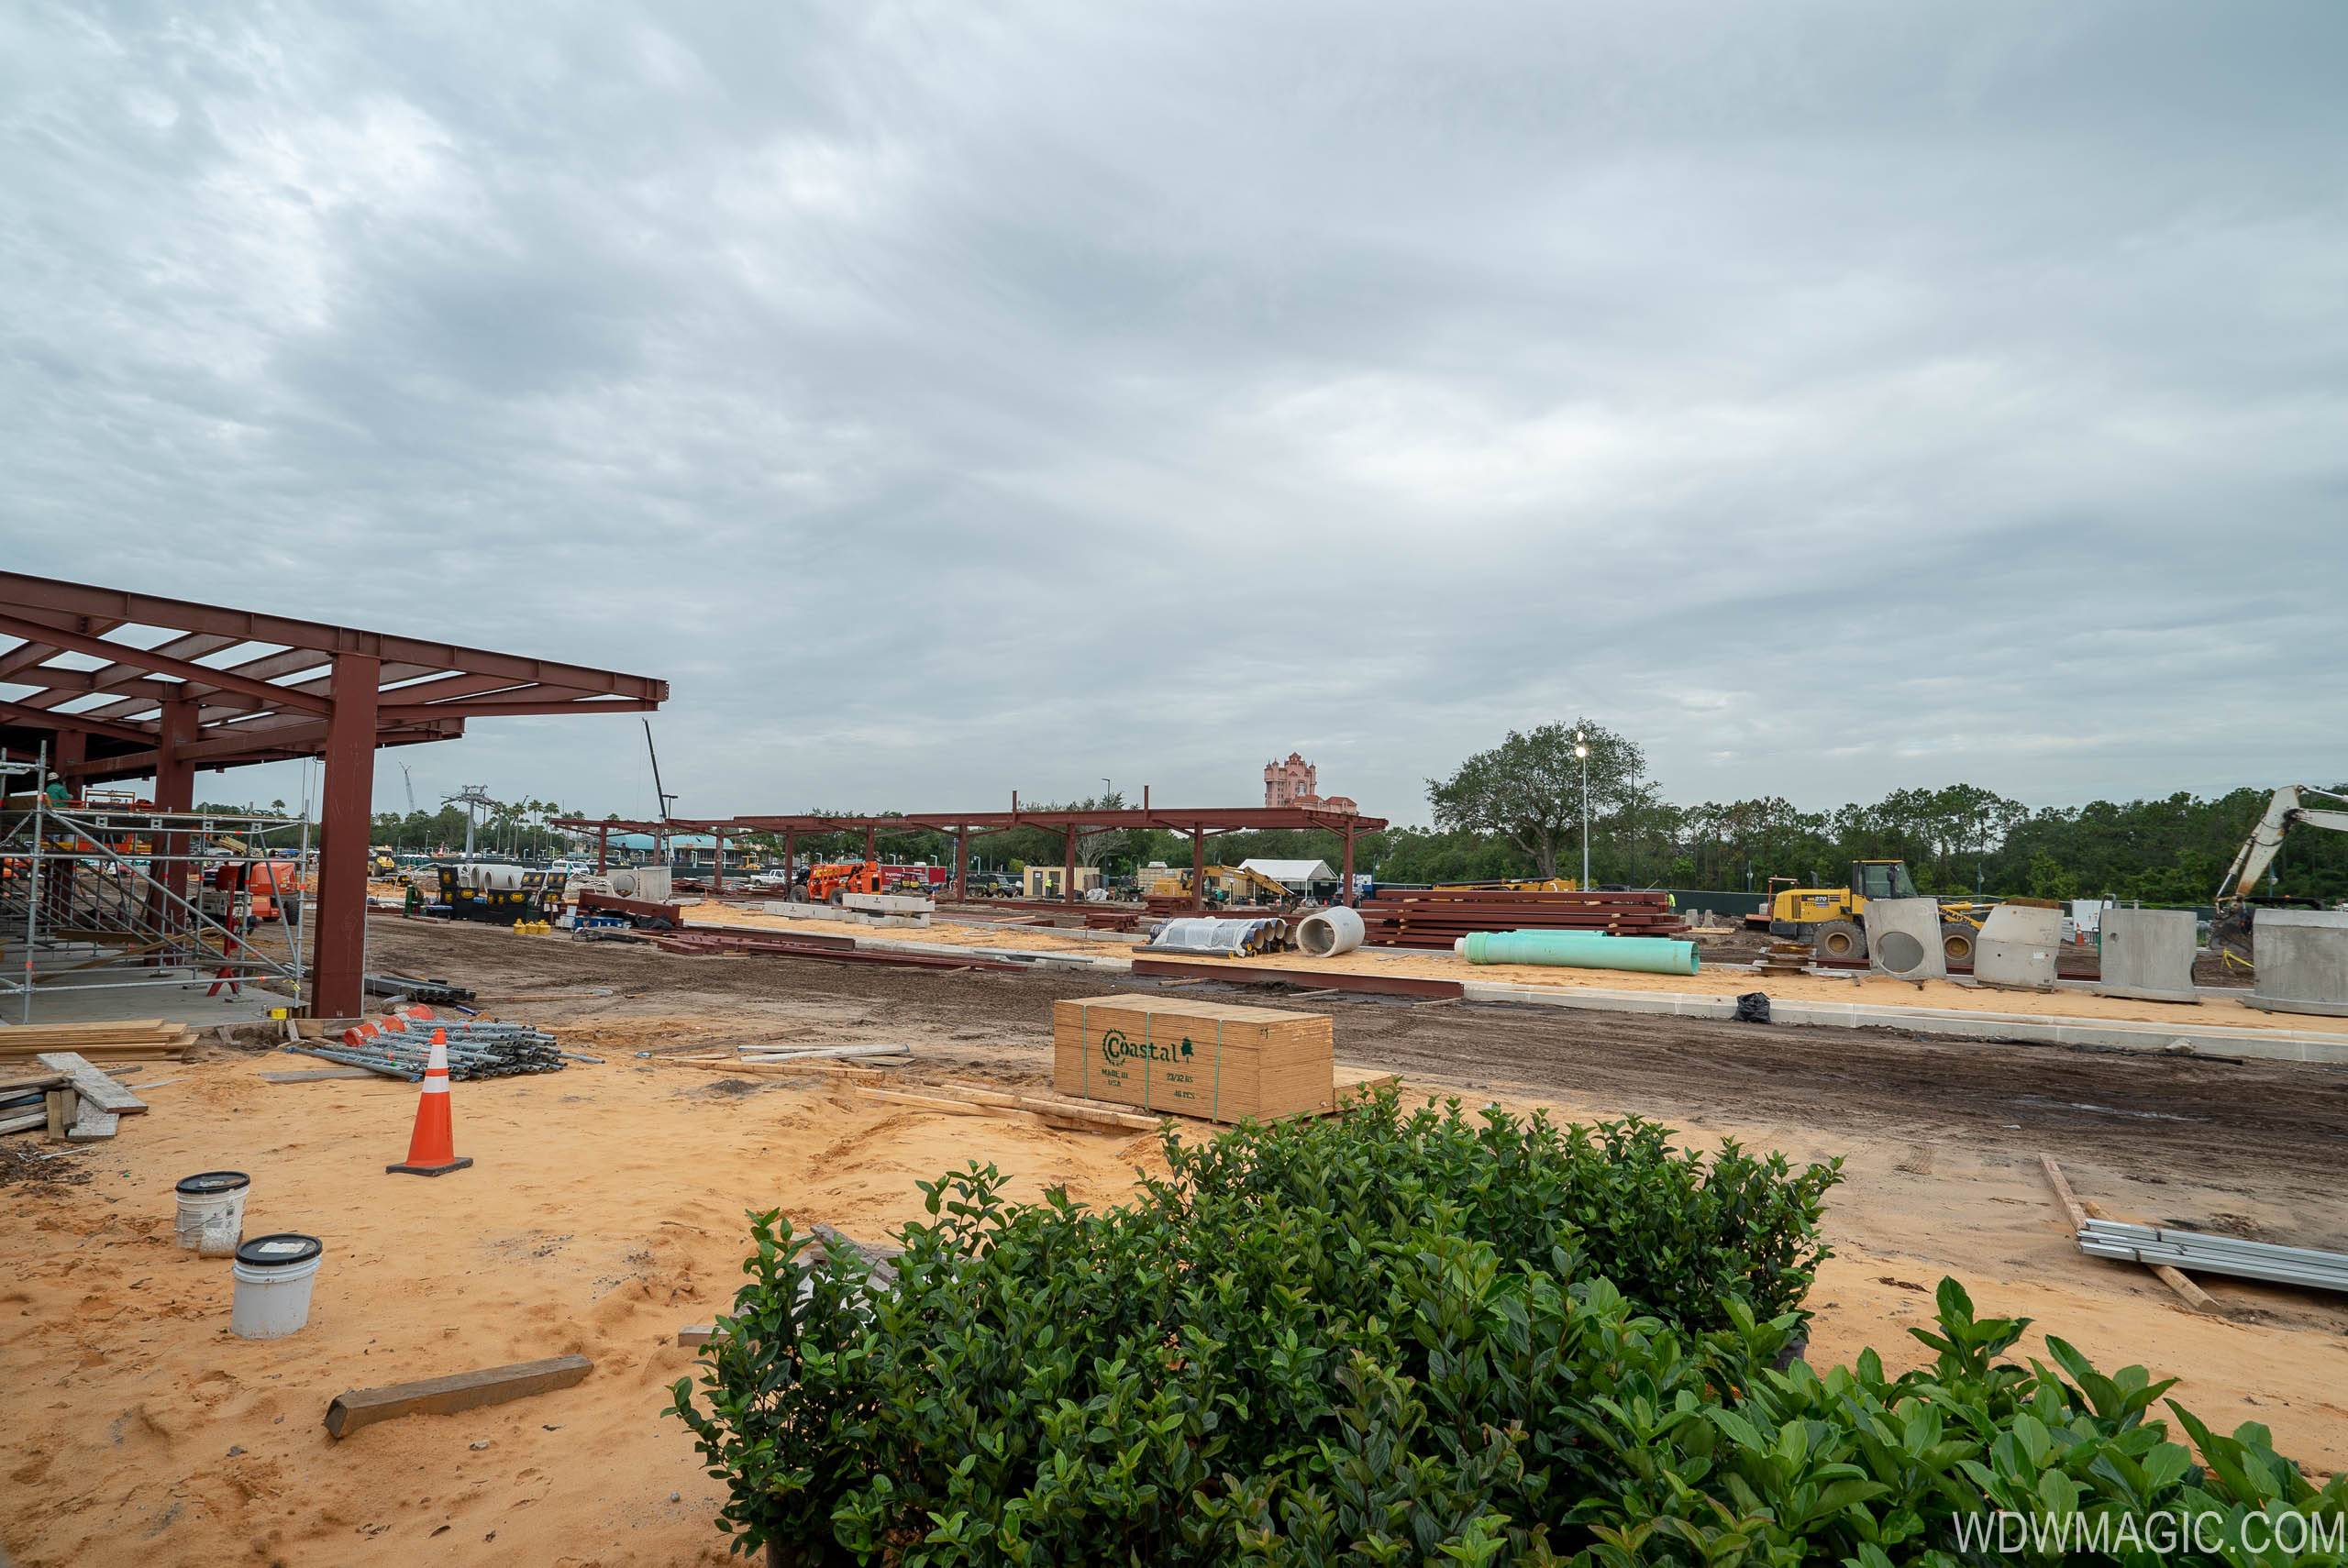  New Charter Bus stop area at Disney's Hollywood Studios